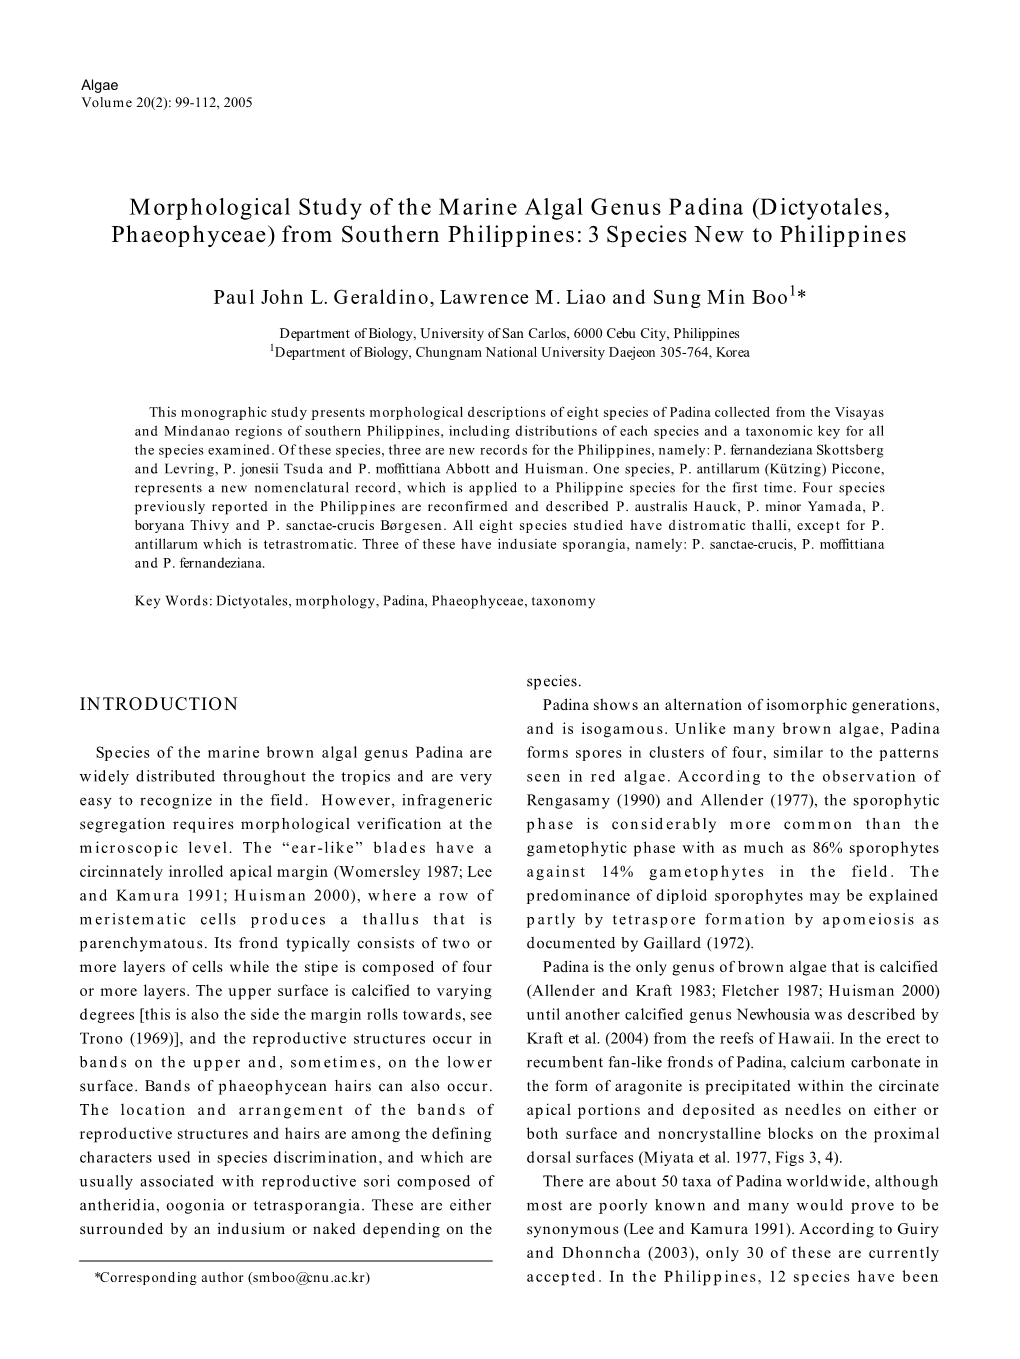 Morphological Study of the Marine Algal Genus Padina (Dictyotales, Phaeophyceae) from Southern Philippines: 3 Species New to Philippines